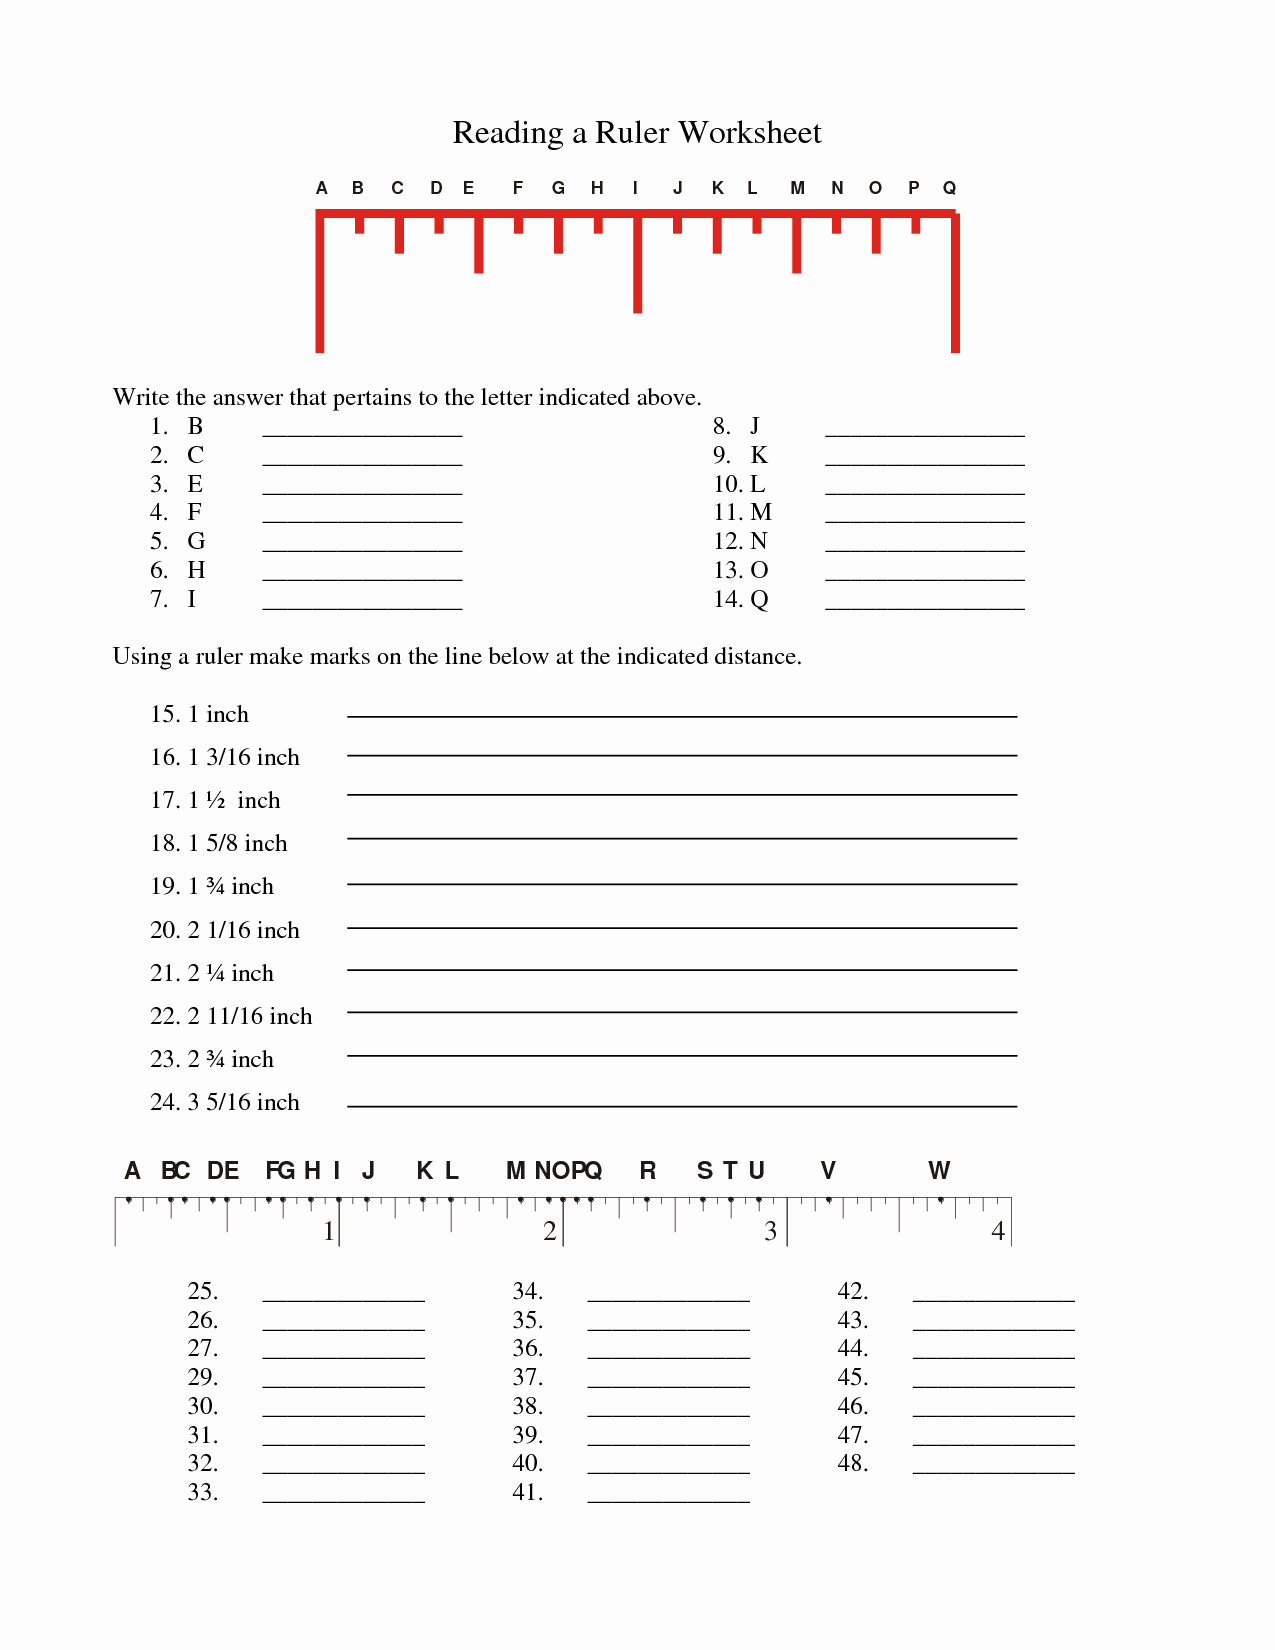 Reading A Ruler Worksheet Pdf Awesome Reading A Ruler Worksheet Pdf the Best Worksheets Image